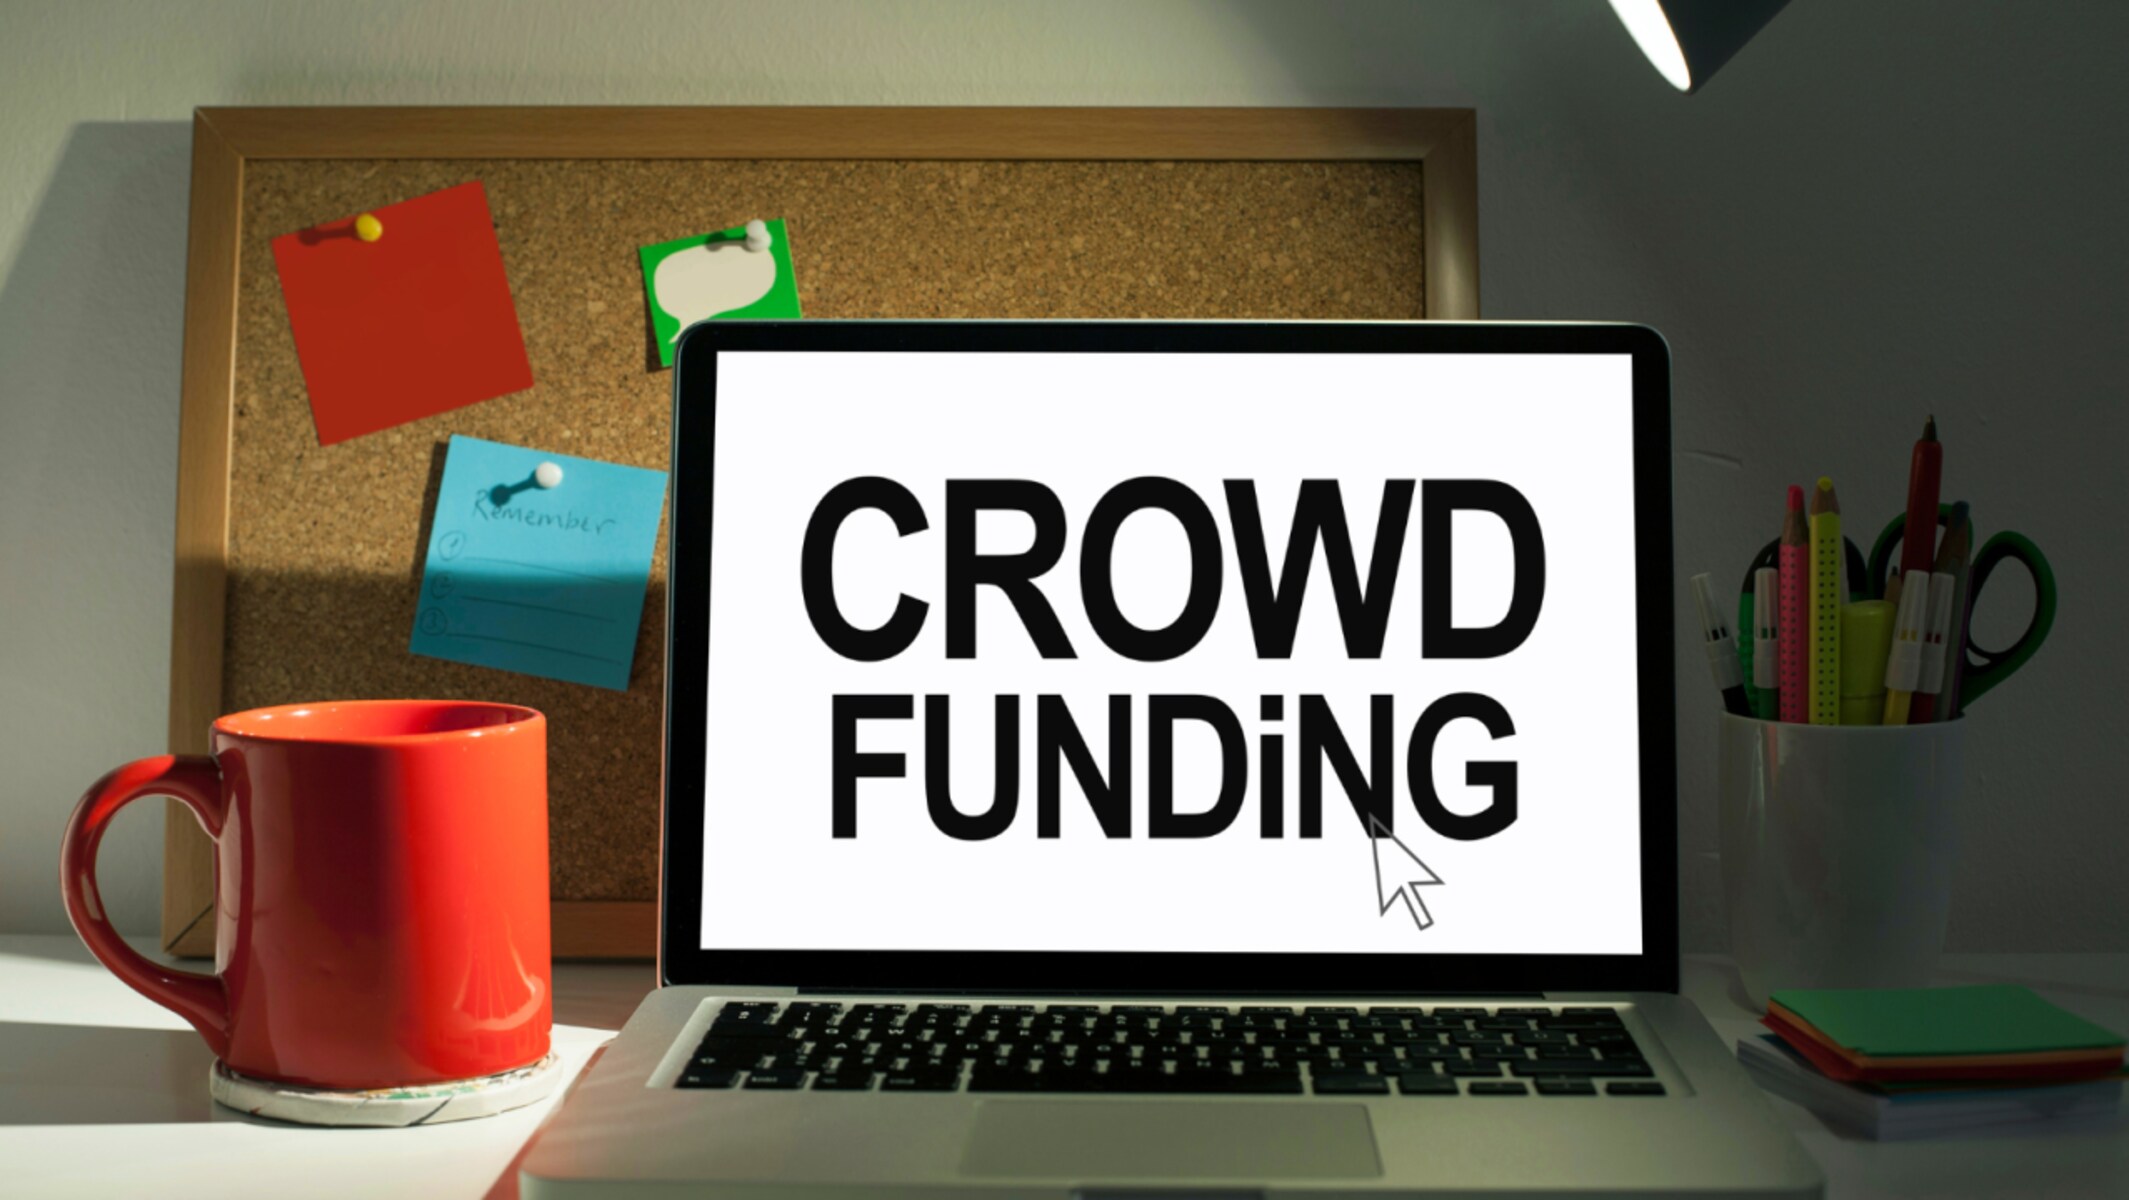 if-you-want-to-do-an-equity-crowdfunding-campaign-which-type-of-business-should-you-form